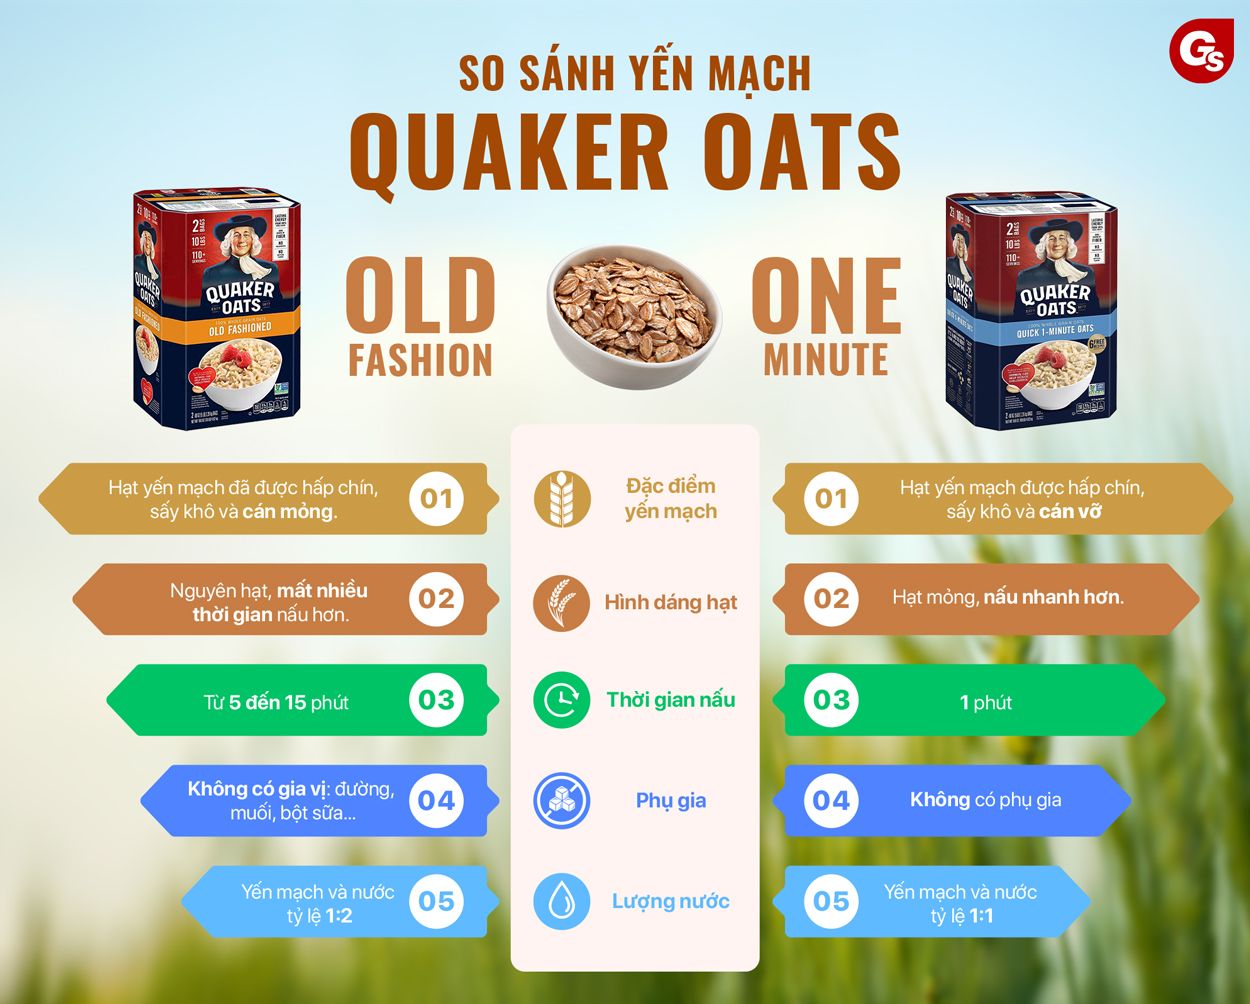 Quaker-Oat-Old-Fashion-Quick-One-Minute-gymstore-6